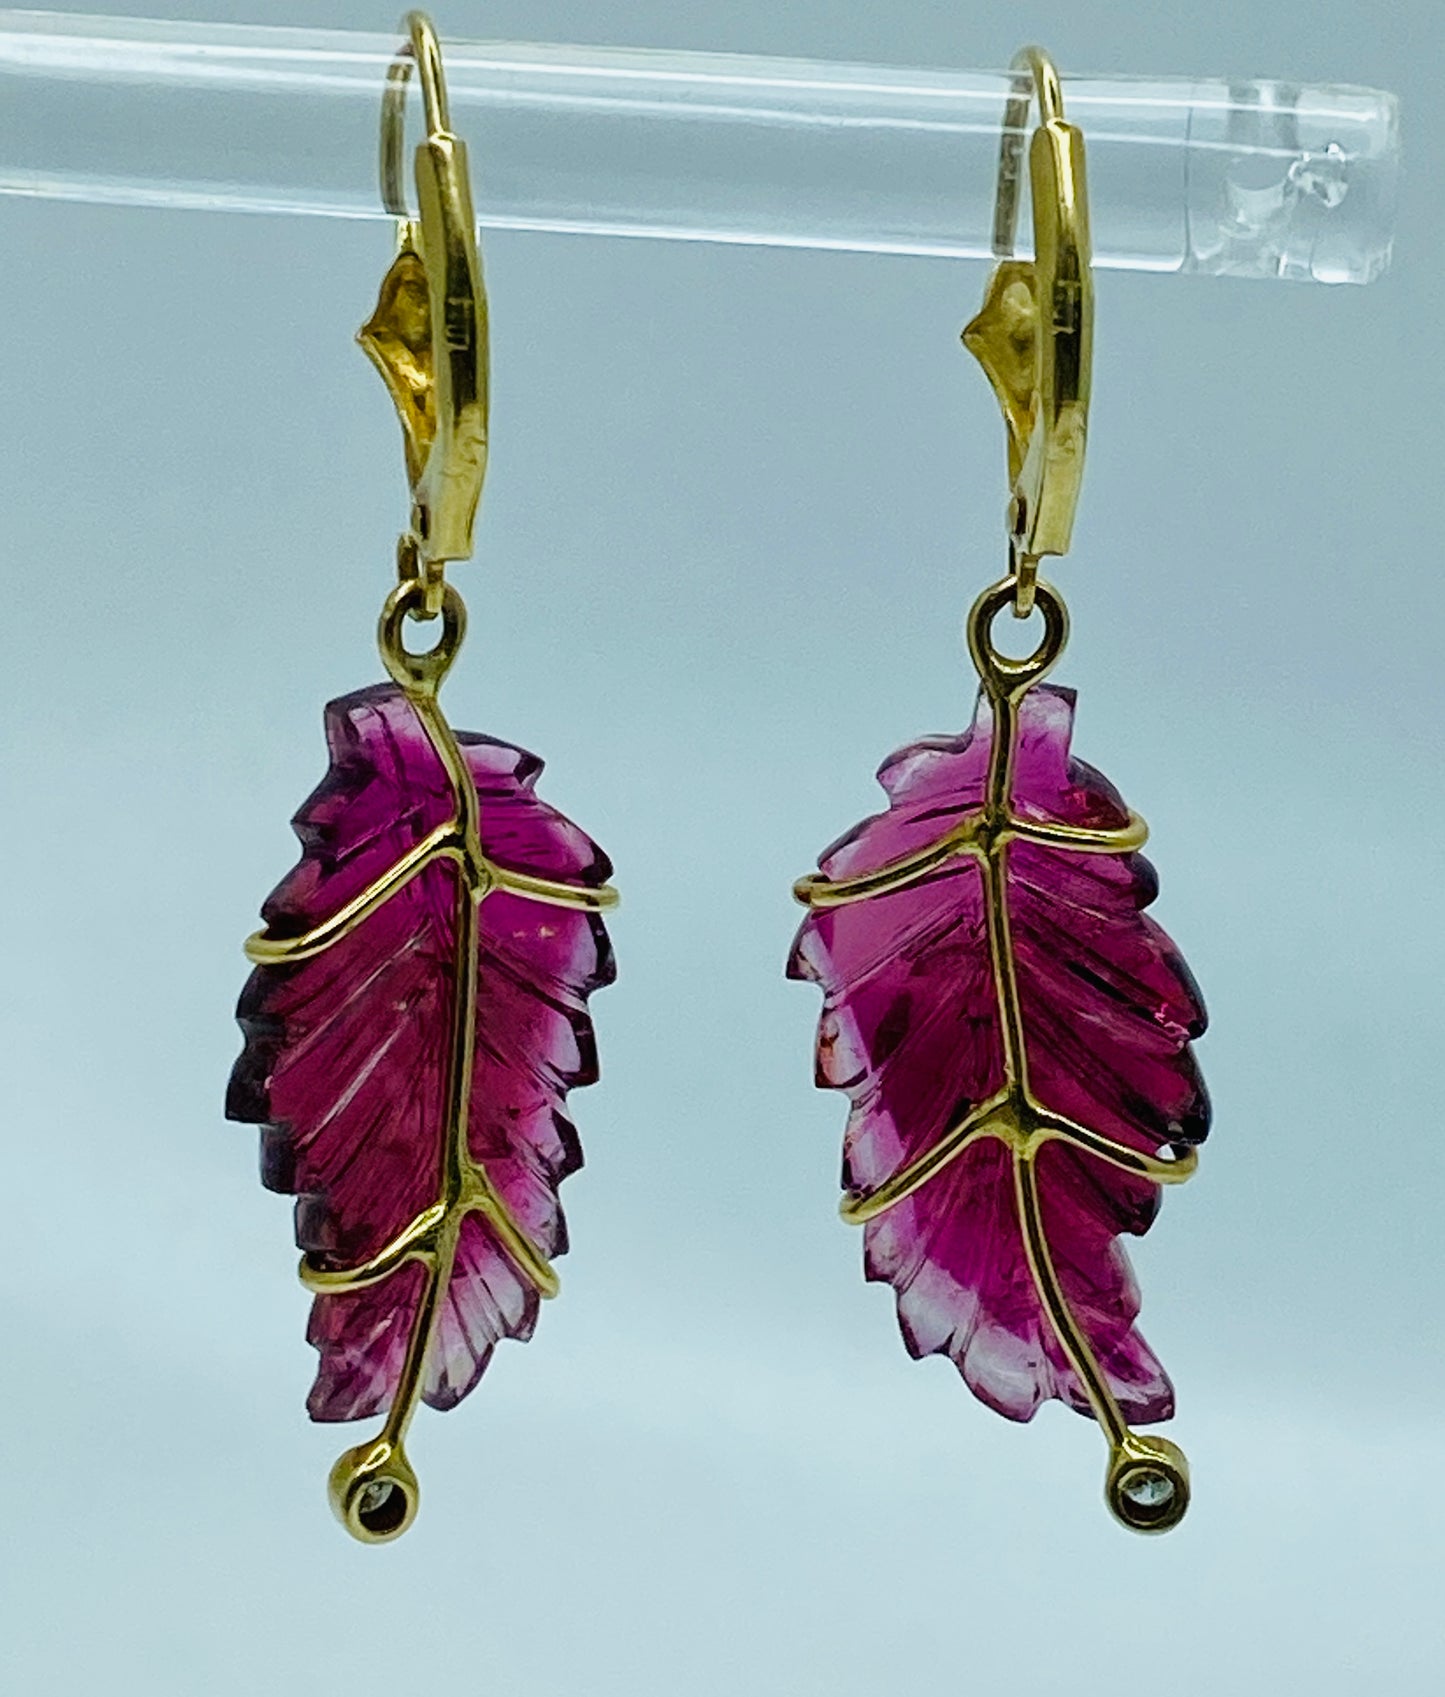 Carved Tourmaline Leaf Earrings with Diamond Accents